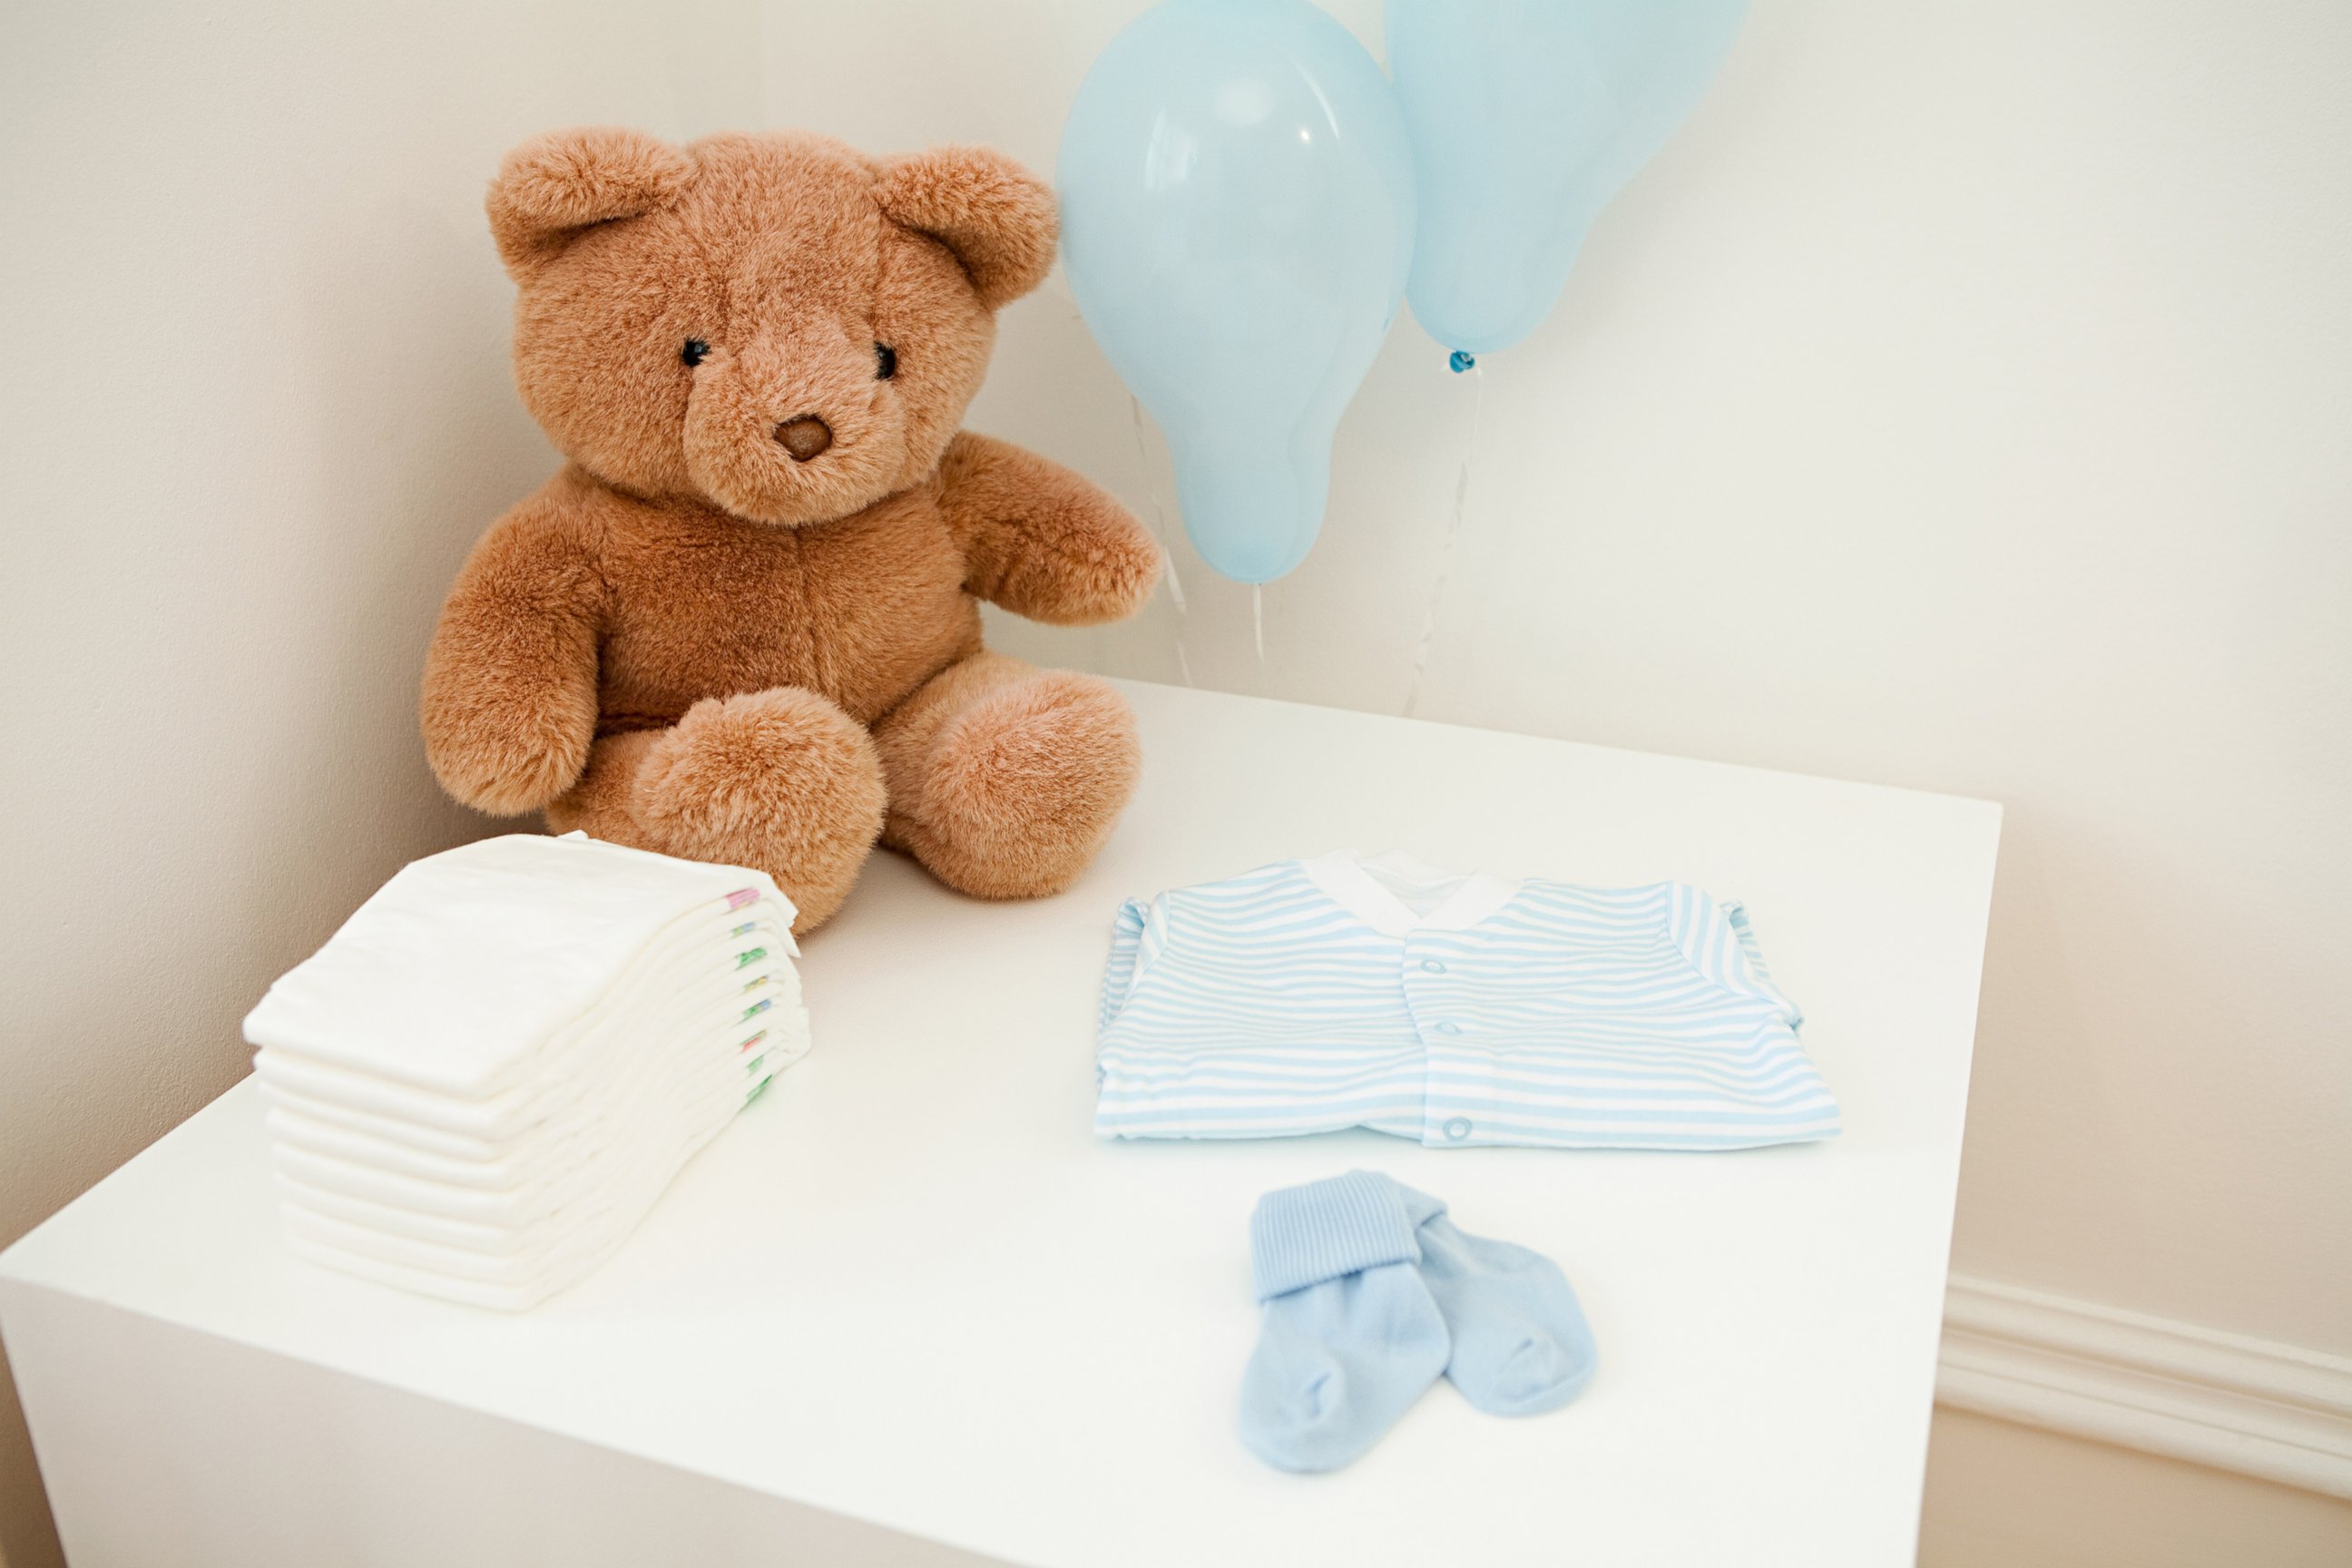 PHOTO: Baby clothes and teddy bear are set out for newborn baby in this undated stock photo.